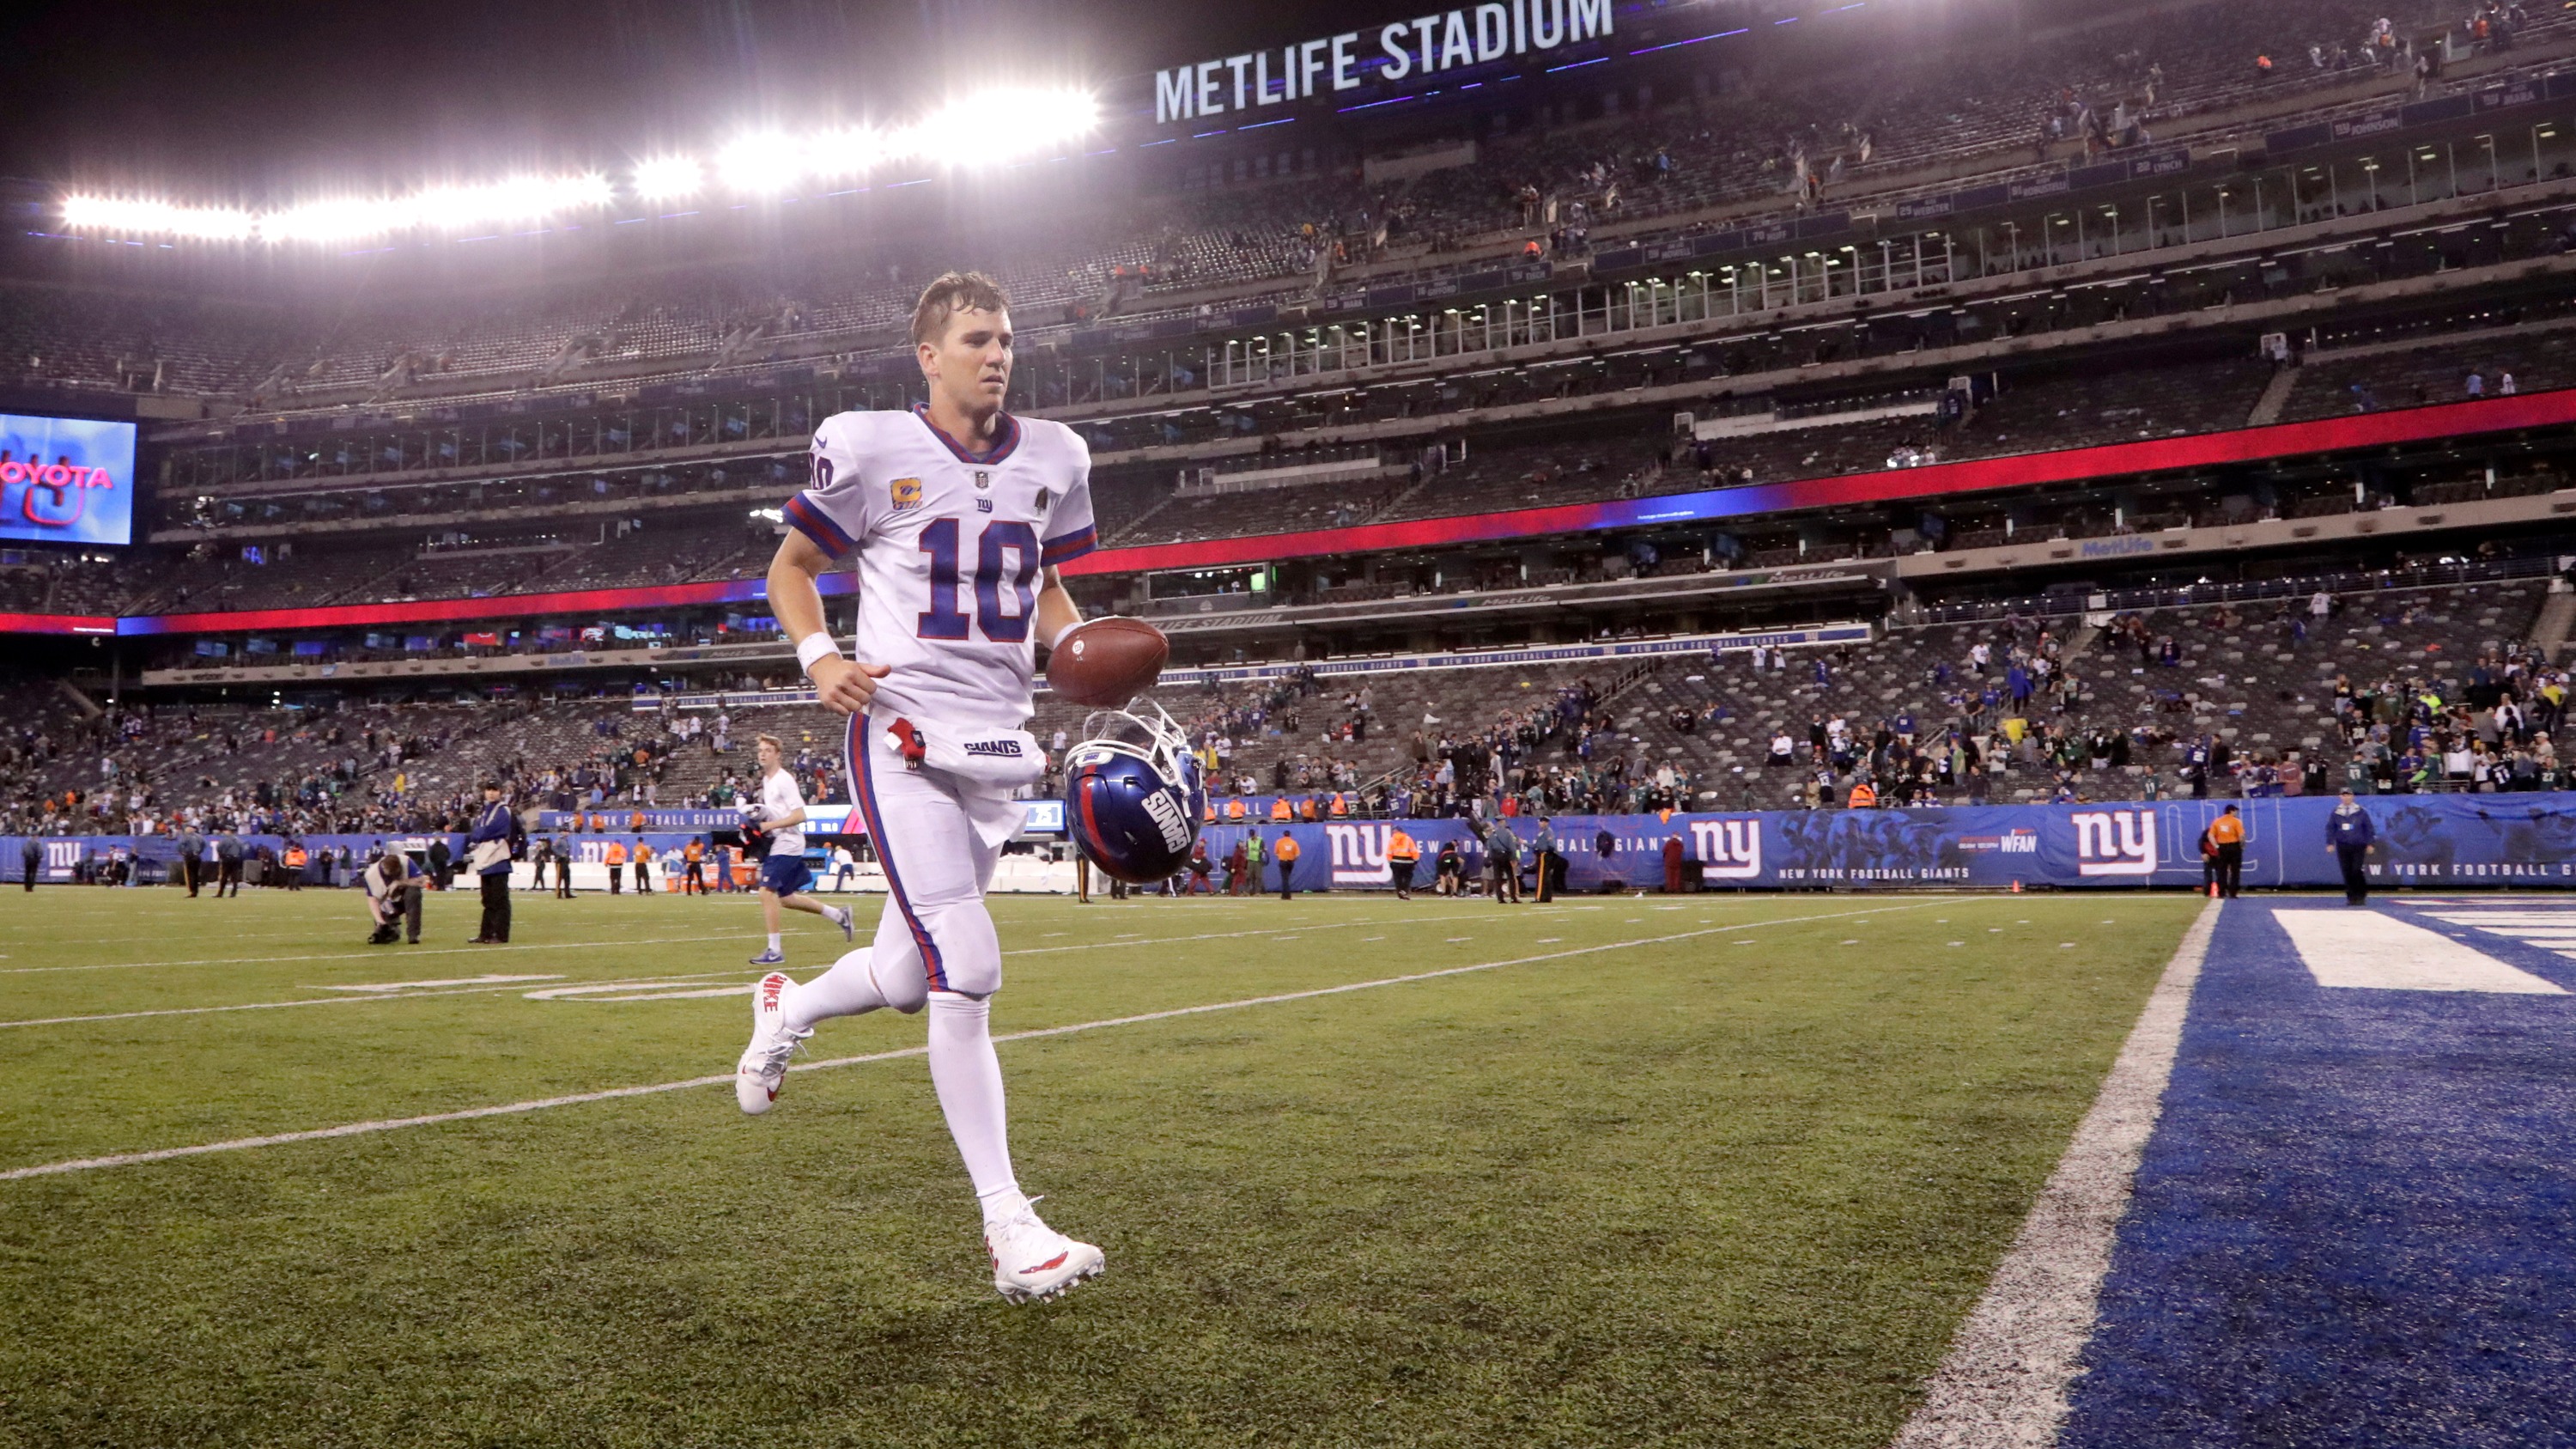 What's next for Eli Manning? One prop suggests retirement